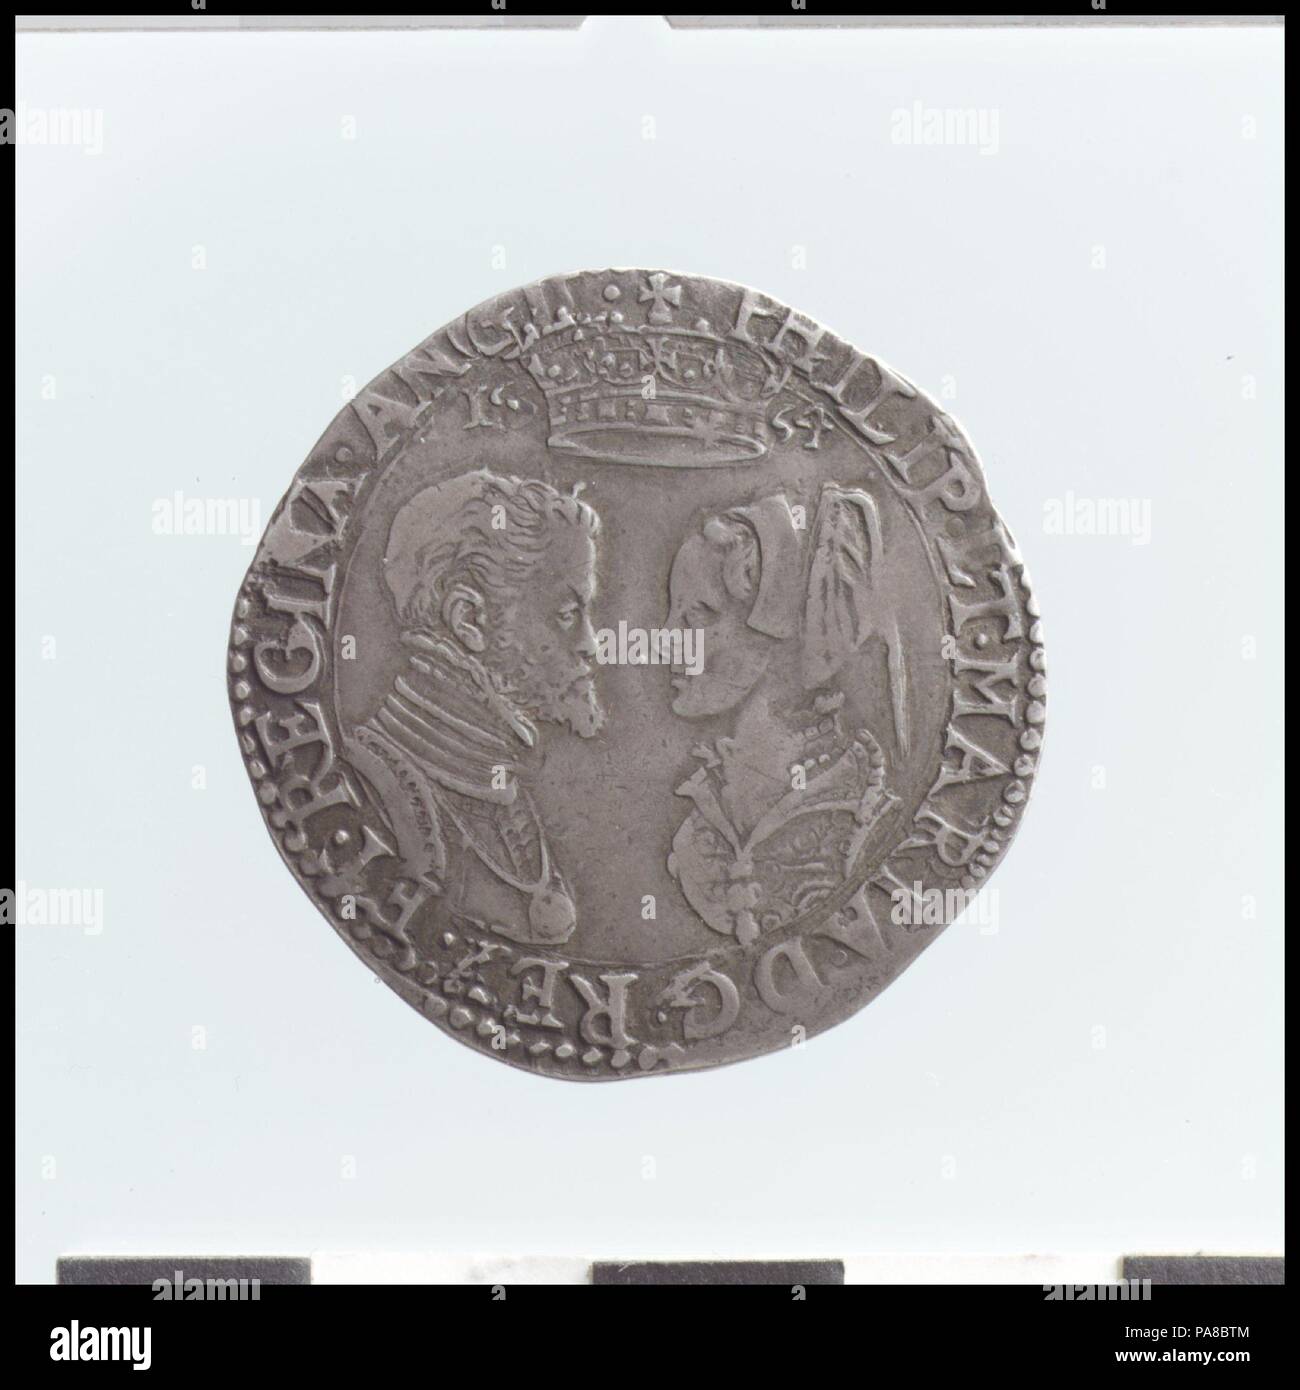 Shilling of Philip and Mary. Culture: British. Dimensions: Diameter: 31 mm. Date: 1554.  The supplies of bullion brought to Europe from the New World in the sixteenth and seventeenth centuries caused inflation, and in response new coinage was issued with a wider range of denominations. Gold coins like the sovereign, with the value of one pound, twenty shillings, first appeared in 1489. It was replaced by the unite in 1604 and by the guinea in 1663. Initially minted in gold, the crown was also produced in silver from 1551, with standardized dimensions similar to other European coins. Museum: Me Stock Photo